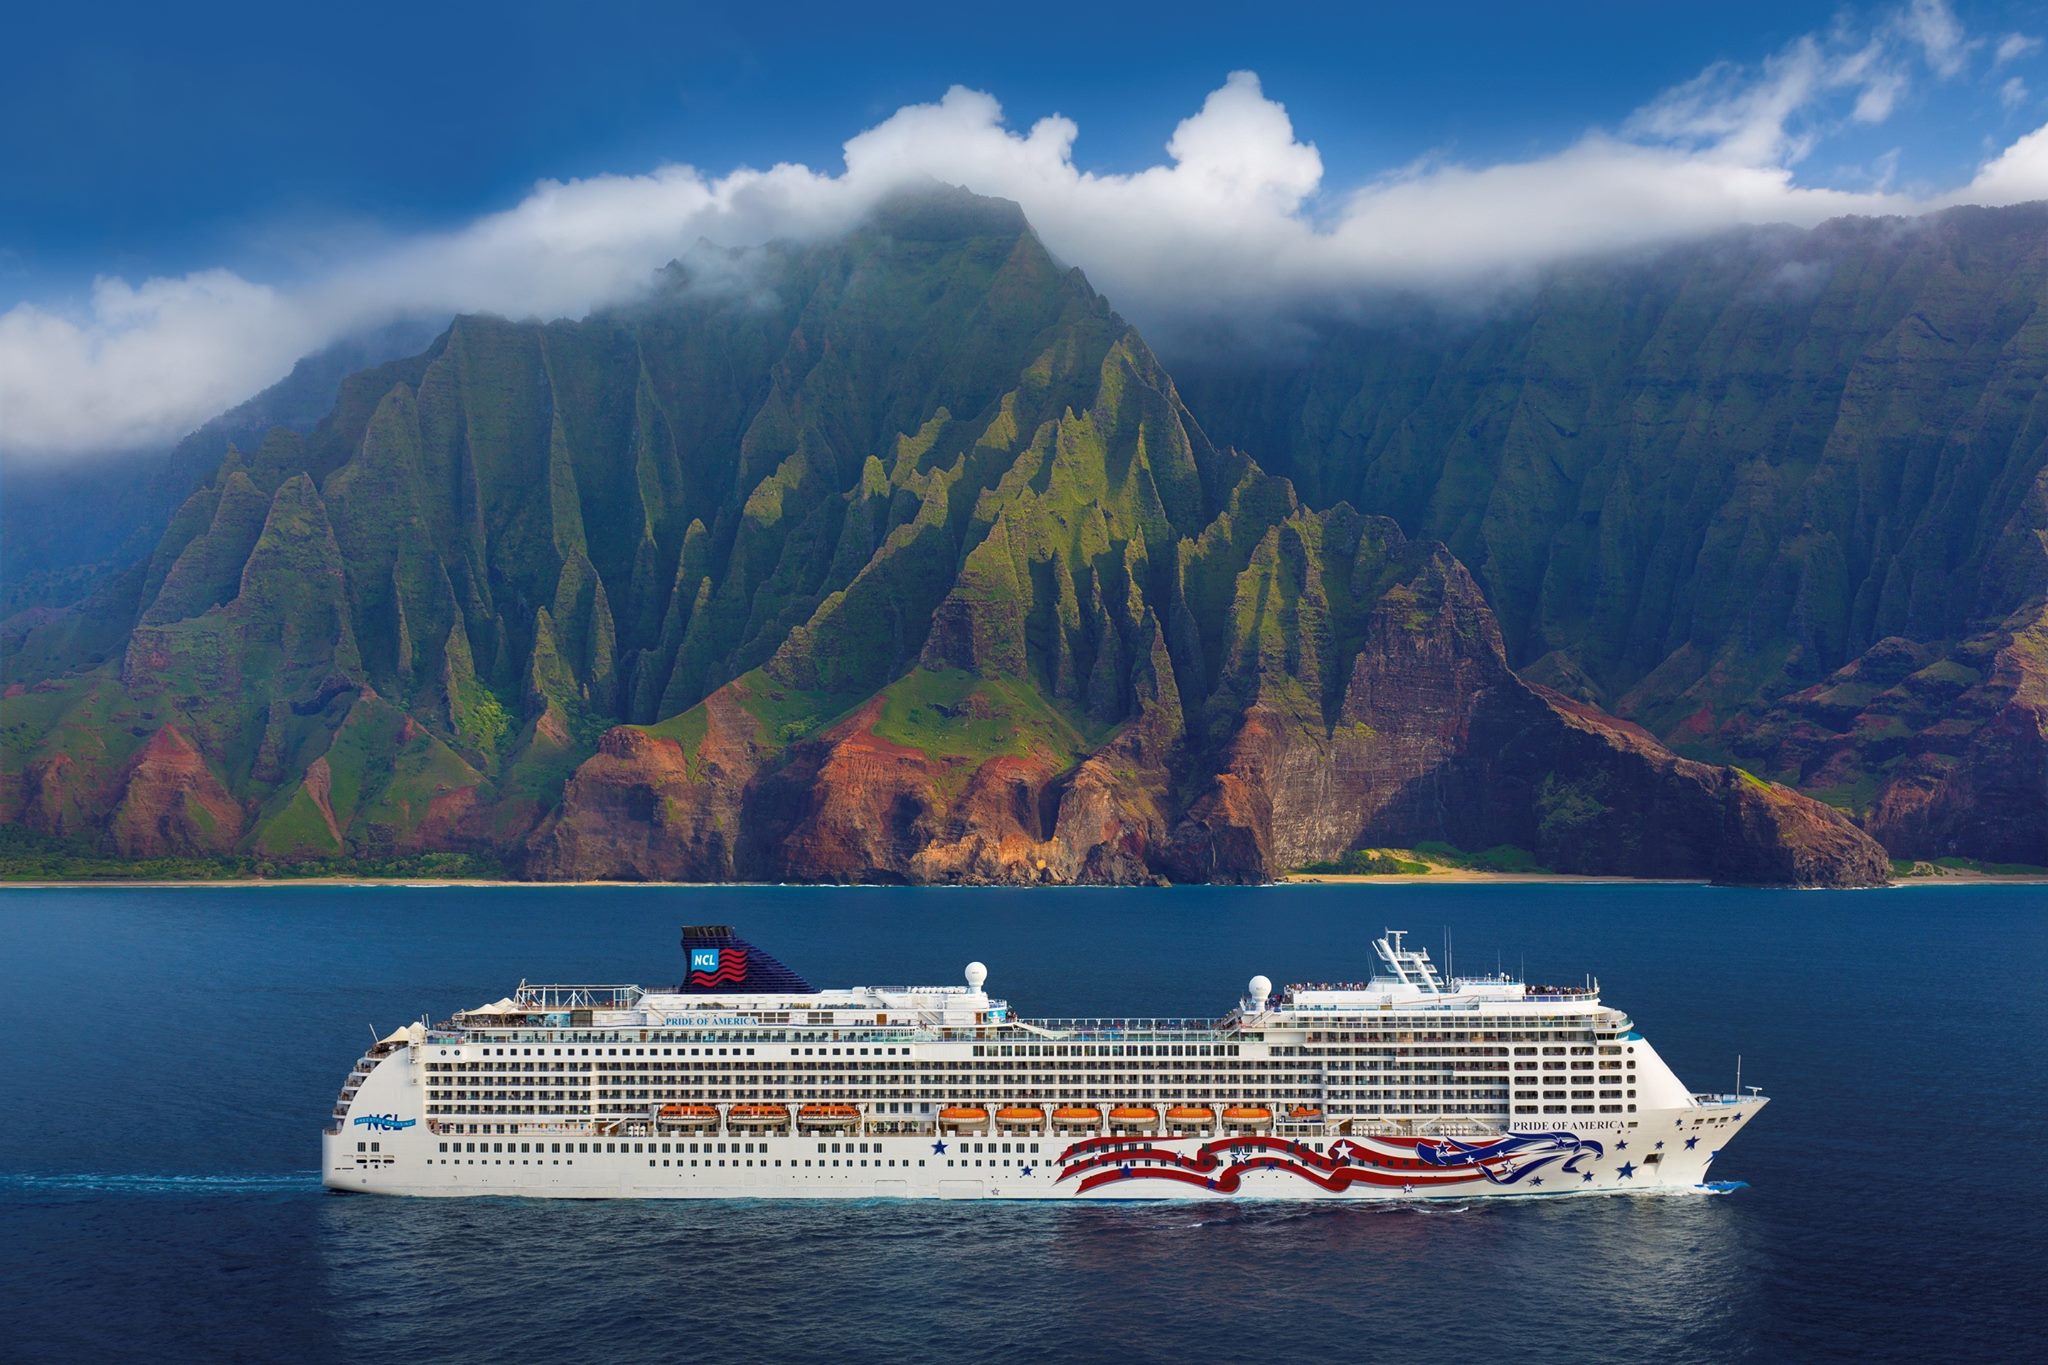 Thinking of cruising with the kids? Book one of these packages now.